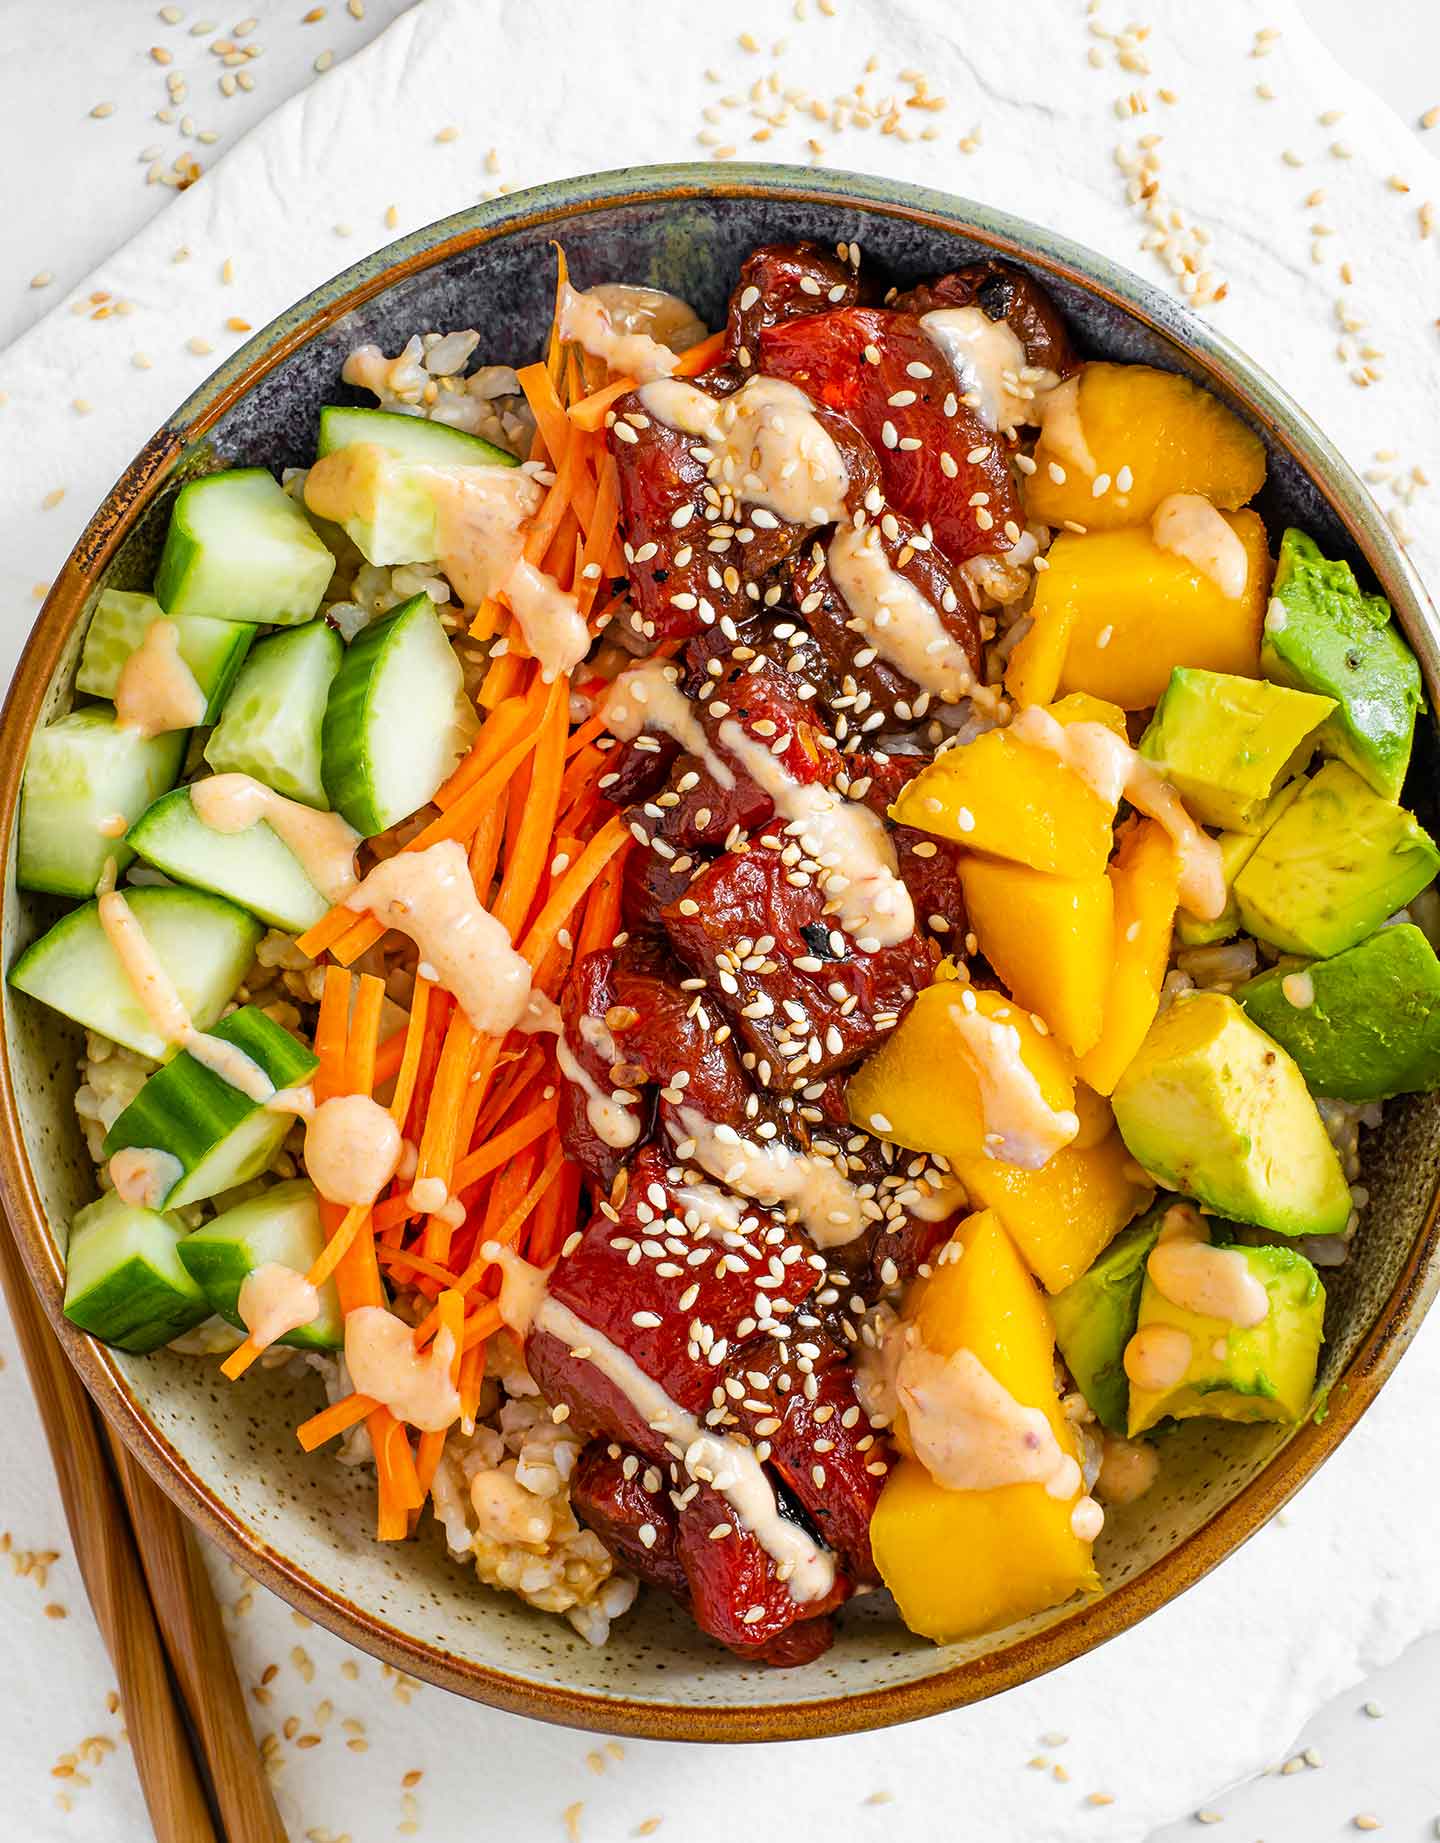 Top down view of a poke bowl with the colourful ingredients in straight lines. Sesame seeds are scattered on the tray beneath the bowl.